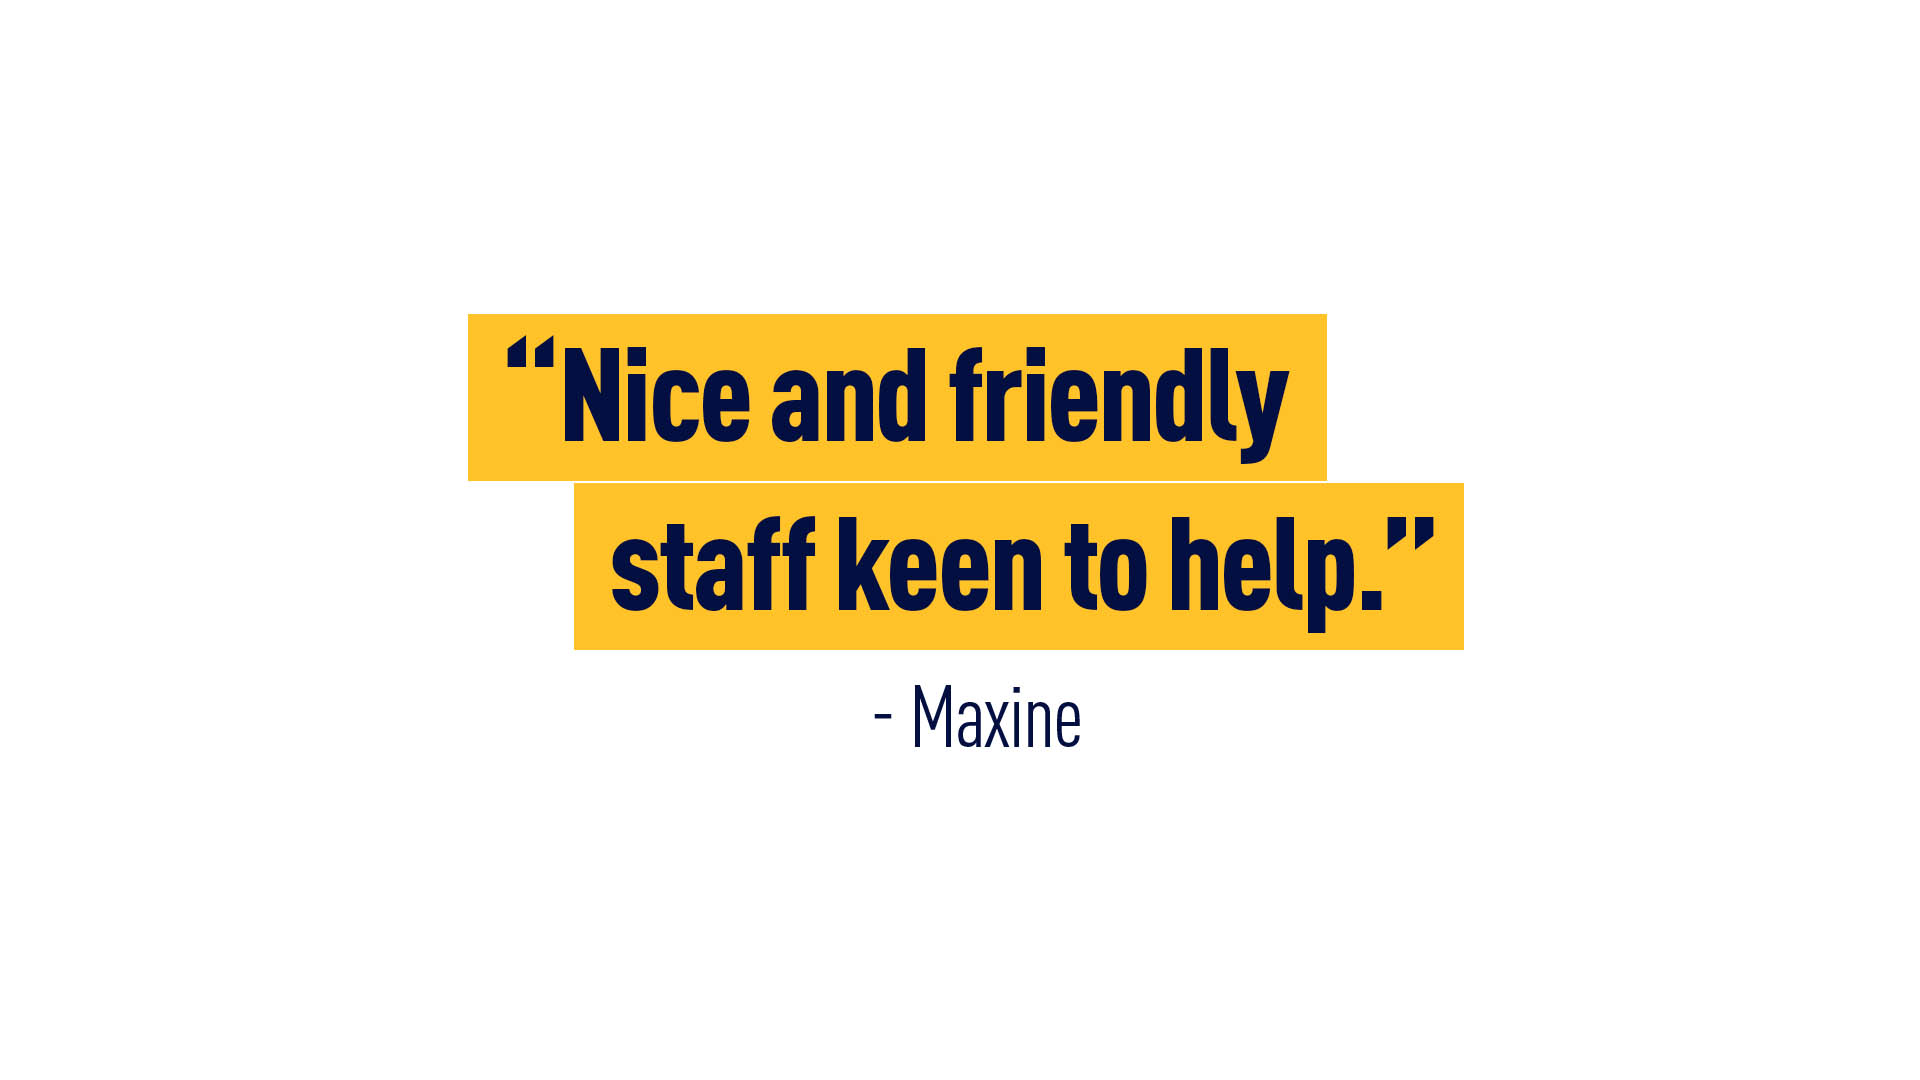 “Nice and friendly staff keen to help.” - Maxine